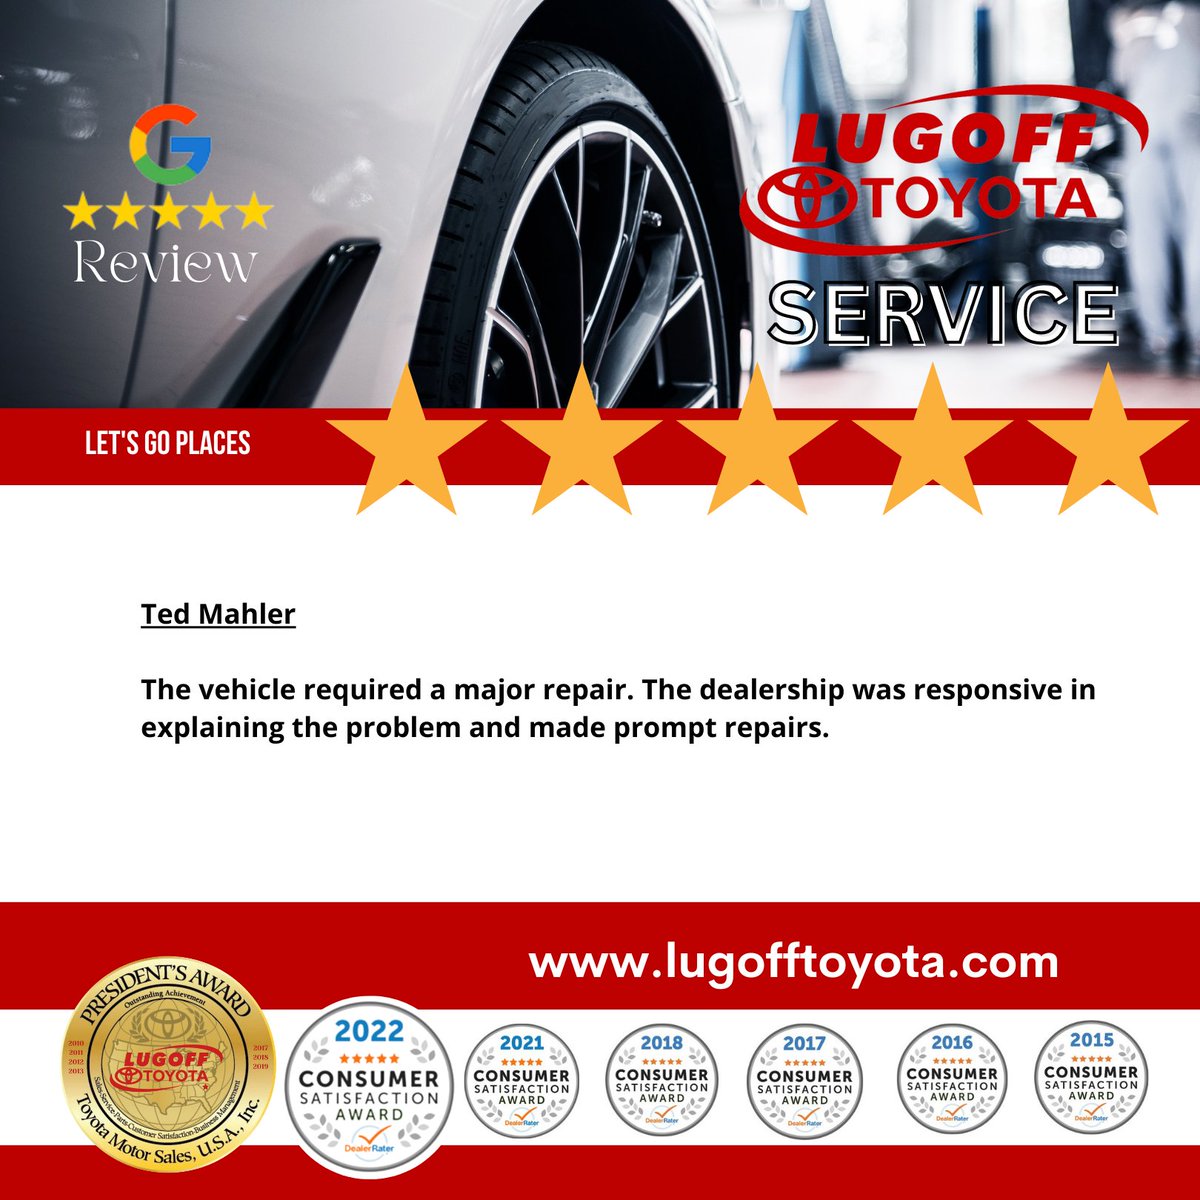 Ted our Service Department is thrilled to read your review! 

#fastfairfriendly #lugofftoyota #servicematters #toyotanation #columbiatoyota #toyotalife #toyotacare #toyotaclub #letsgoplaces #toyotalove #drivepure